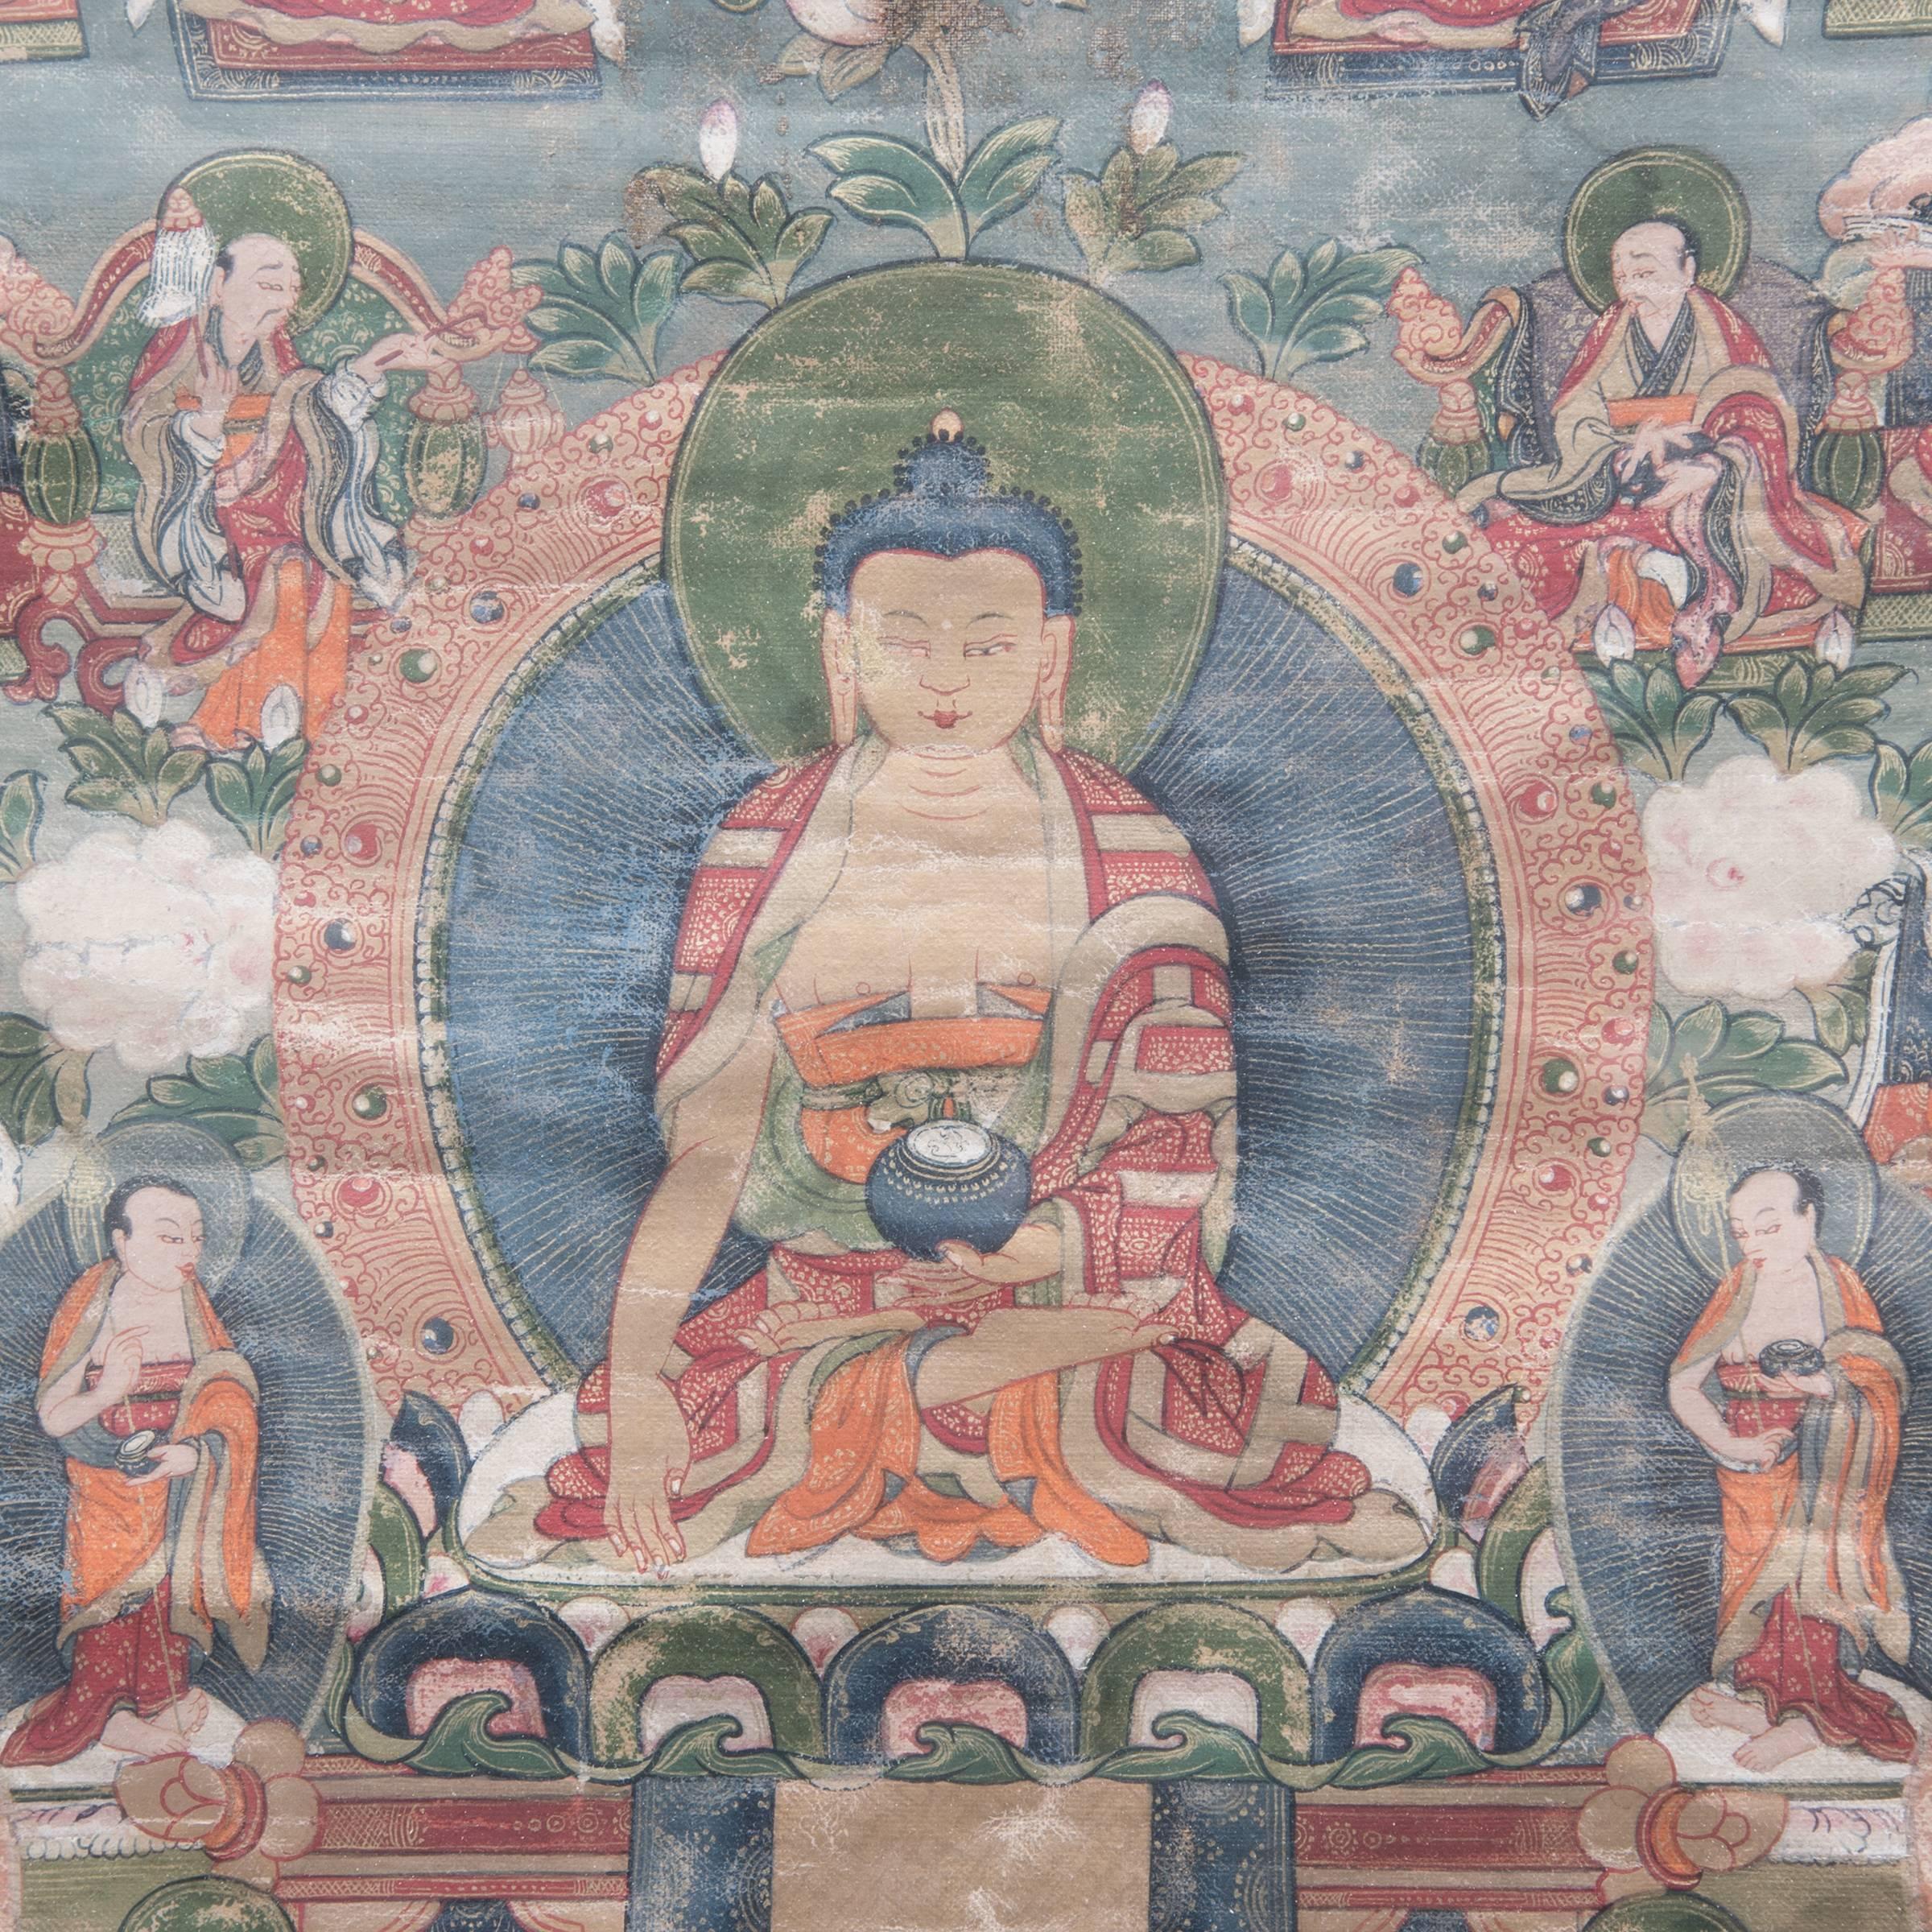 Historically in Buddhist Tibet, patrons and monks commissioned thangka art, or sacred painting, to focus their meditations and prayers. This 19th-century Tibetan Thangka, painted in rich red, green, and blue pigments, still maintains incredible